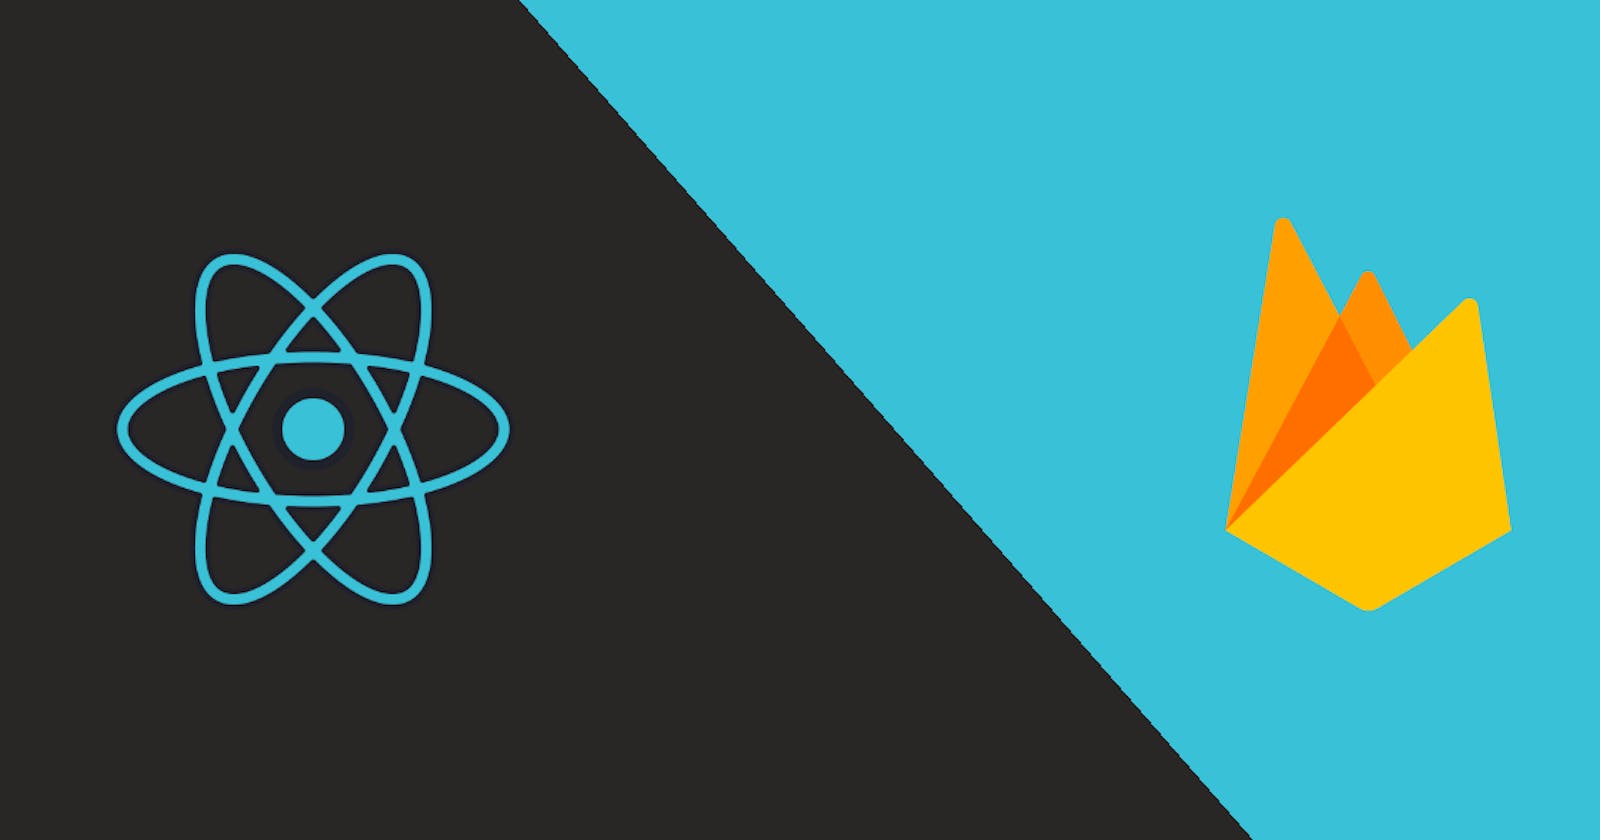 Deploy React Apps for Free With Firebase Hosting